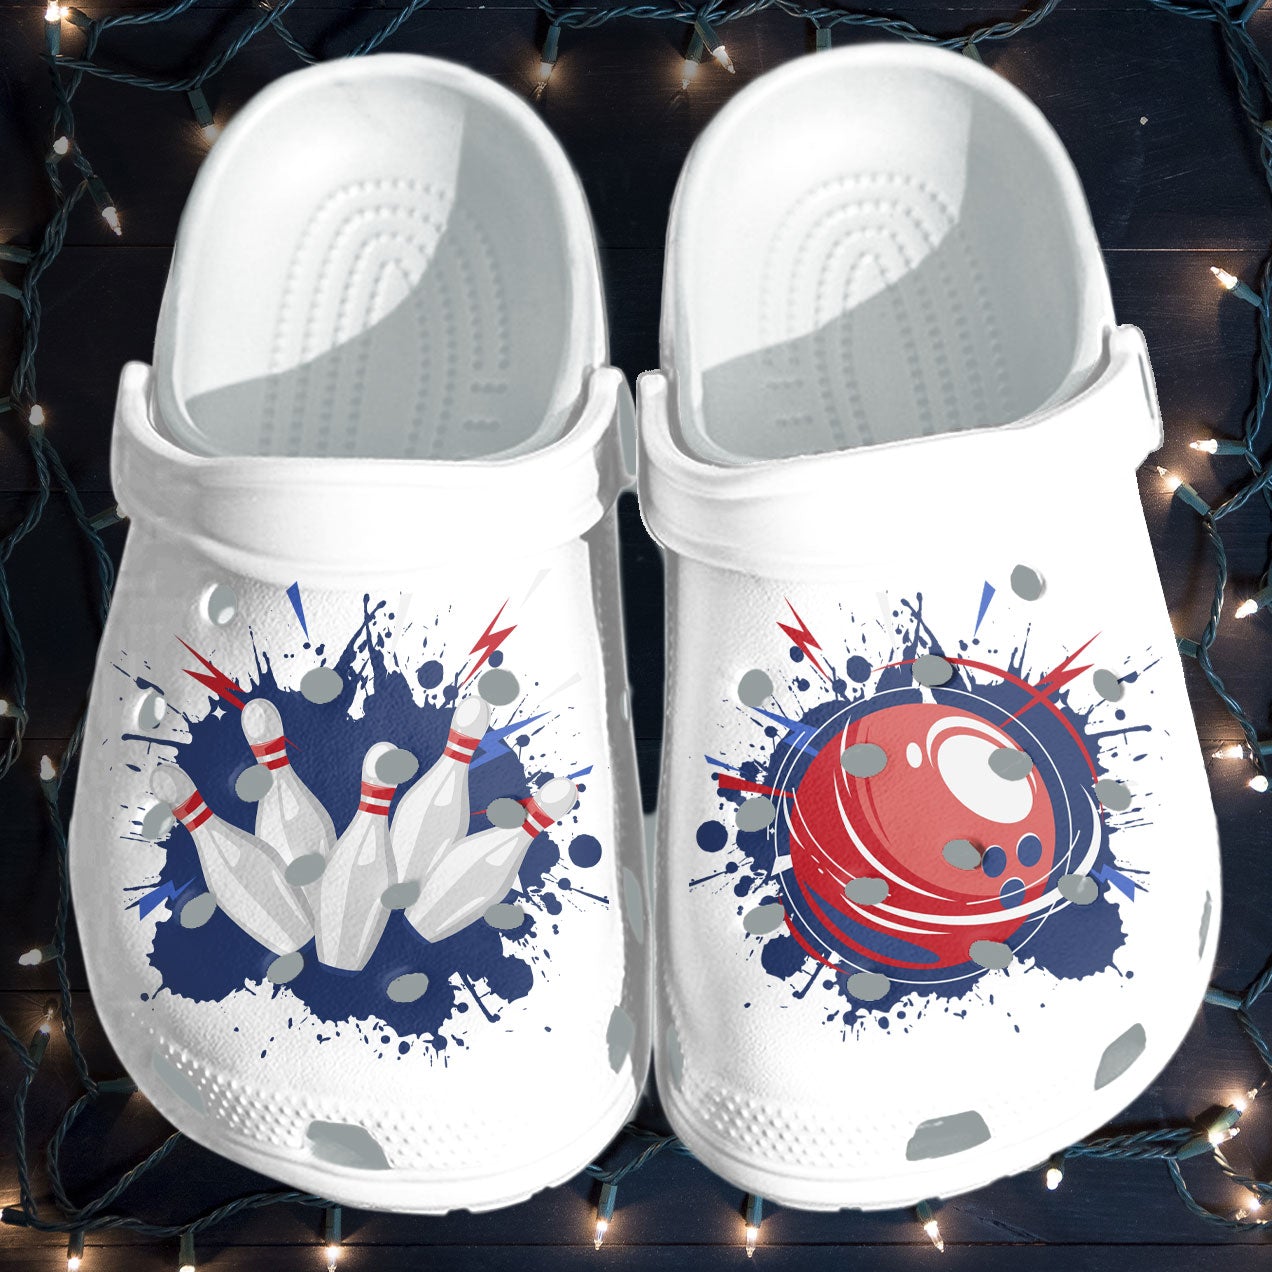 Bowling Strike Ball Outdoor Clog Shoes Gifts Birthday